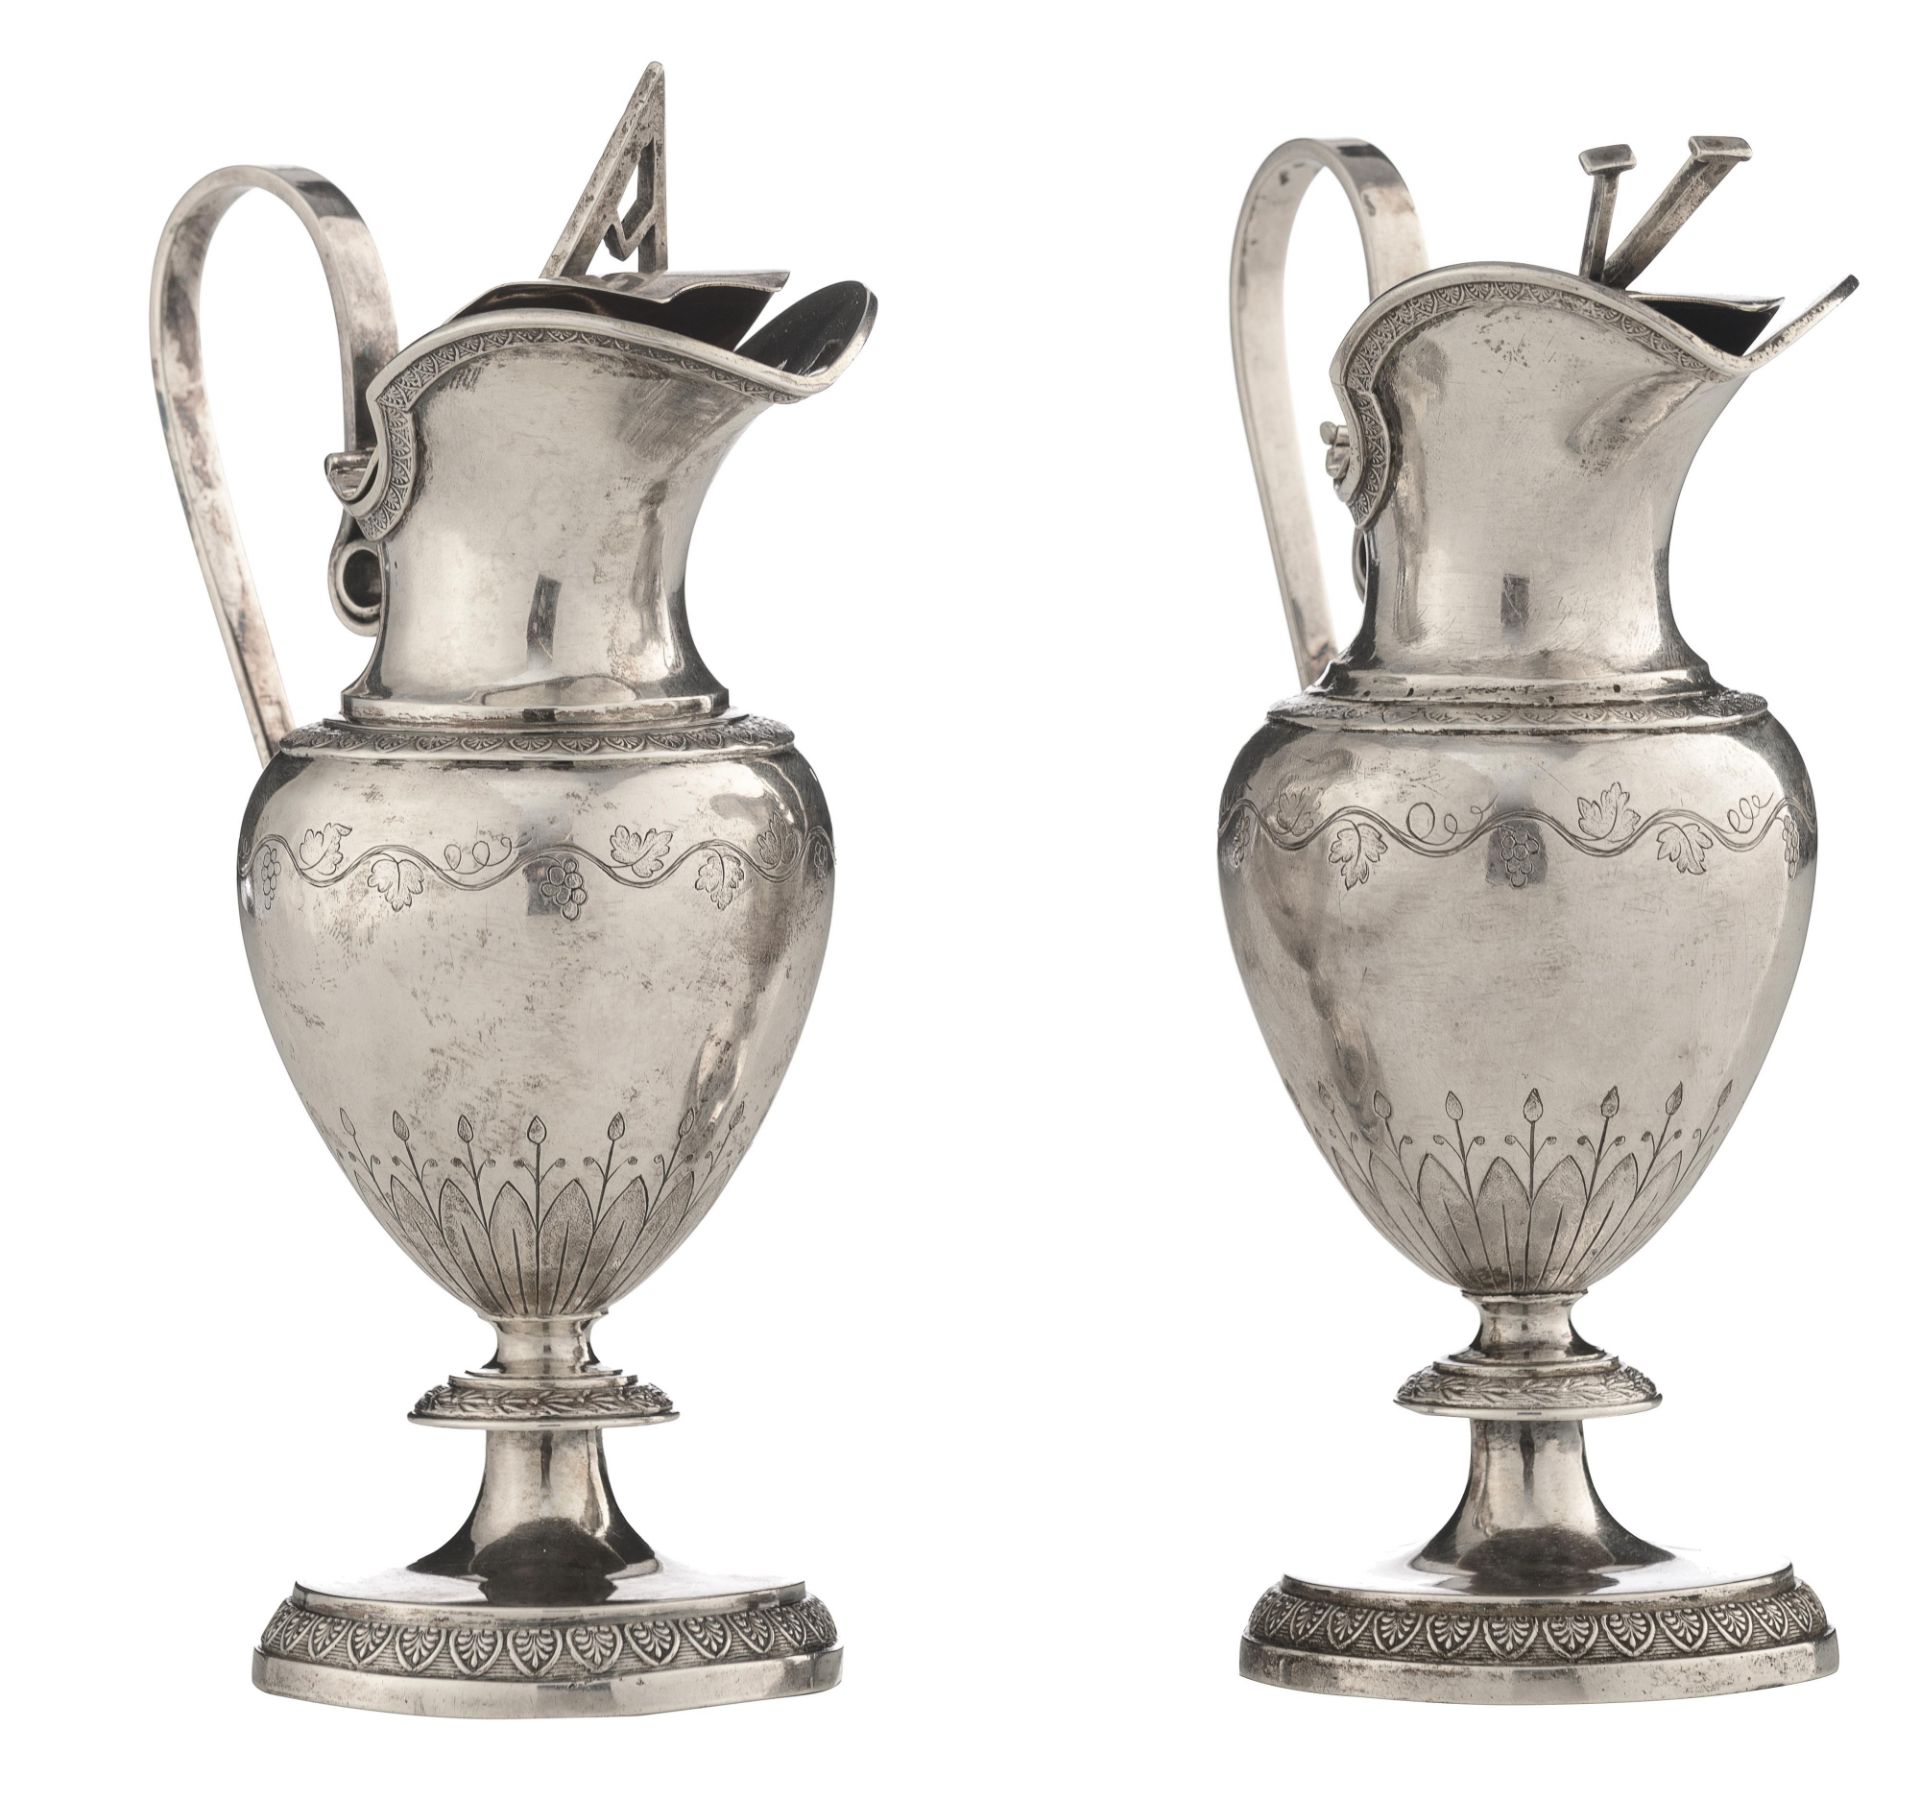 A fine Neoclassical silver ampoule set for water and wine, 'Aqua and Vino', decorated with palmettes